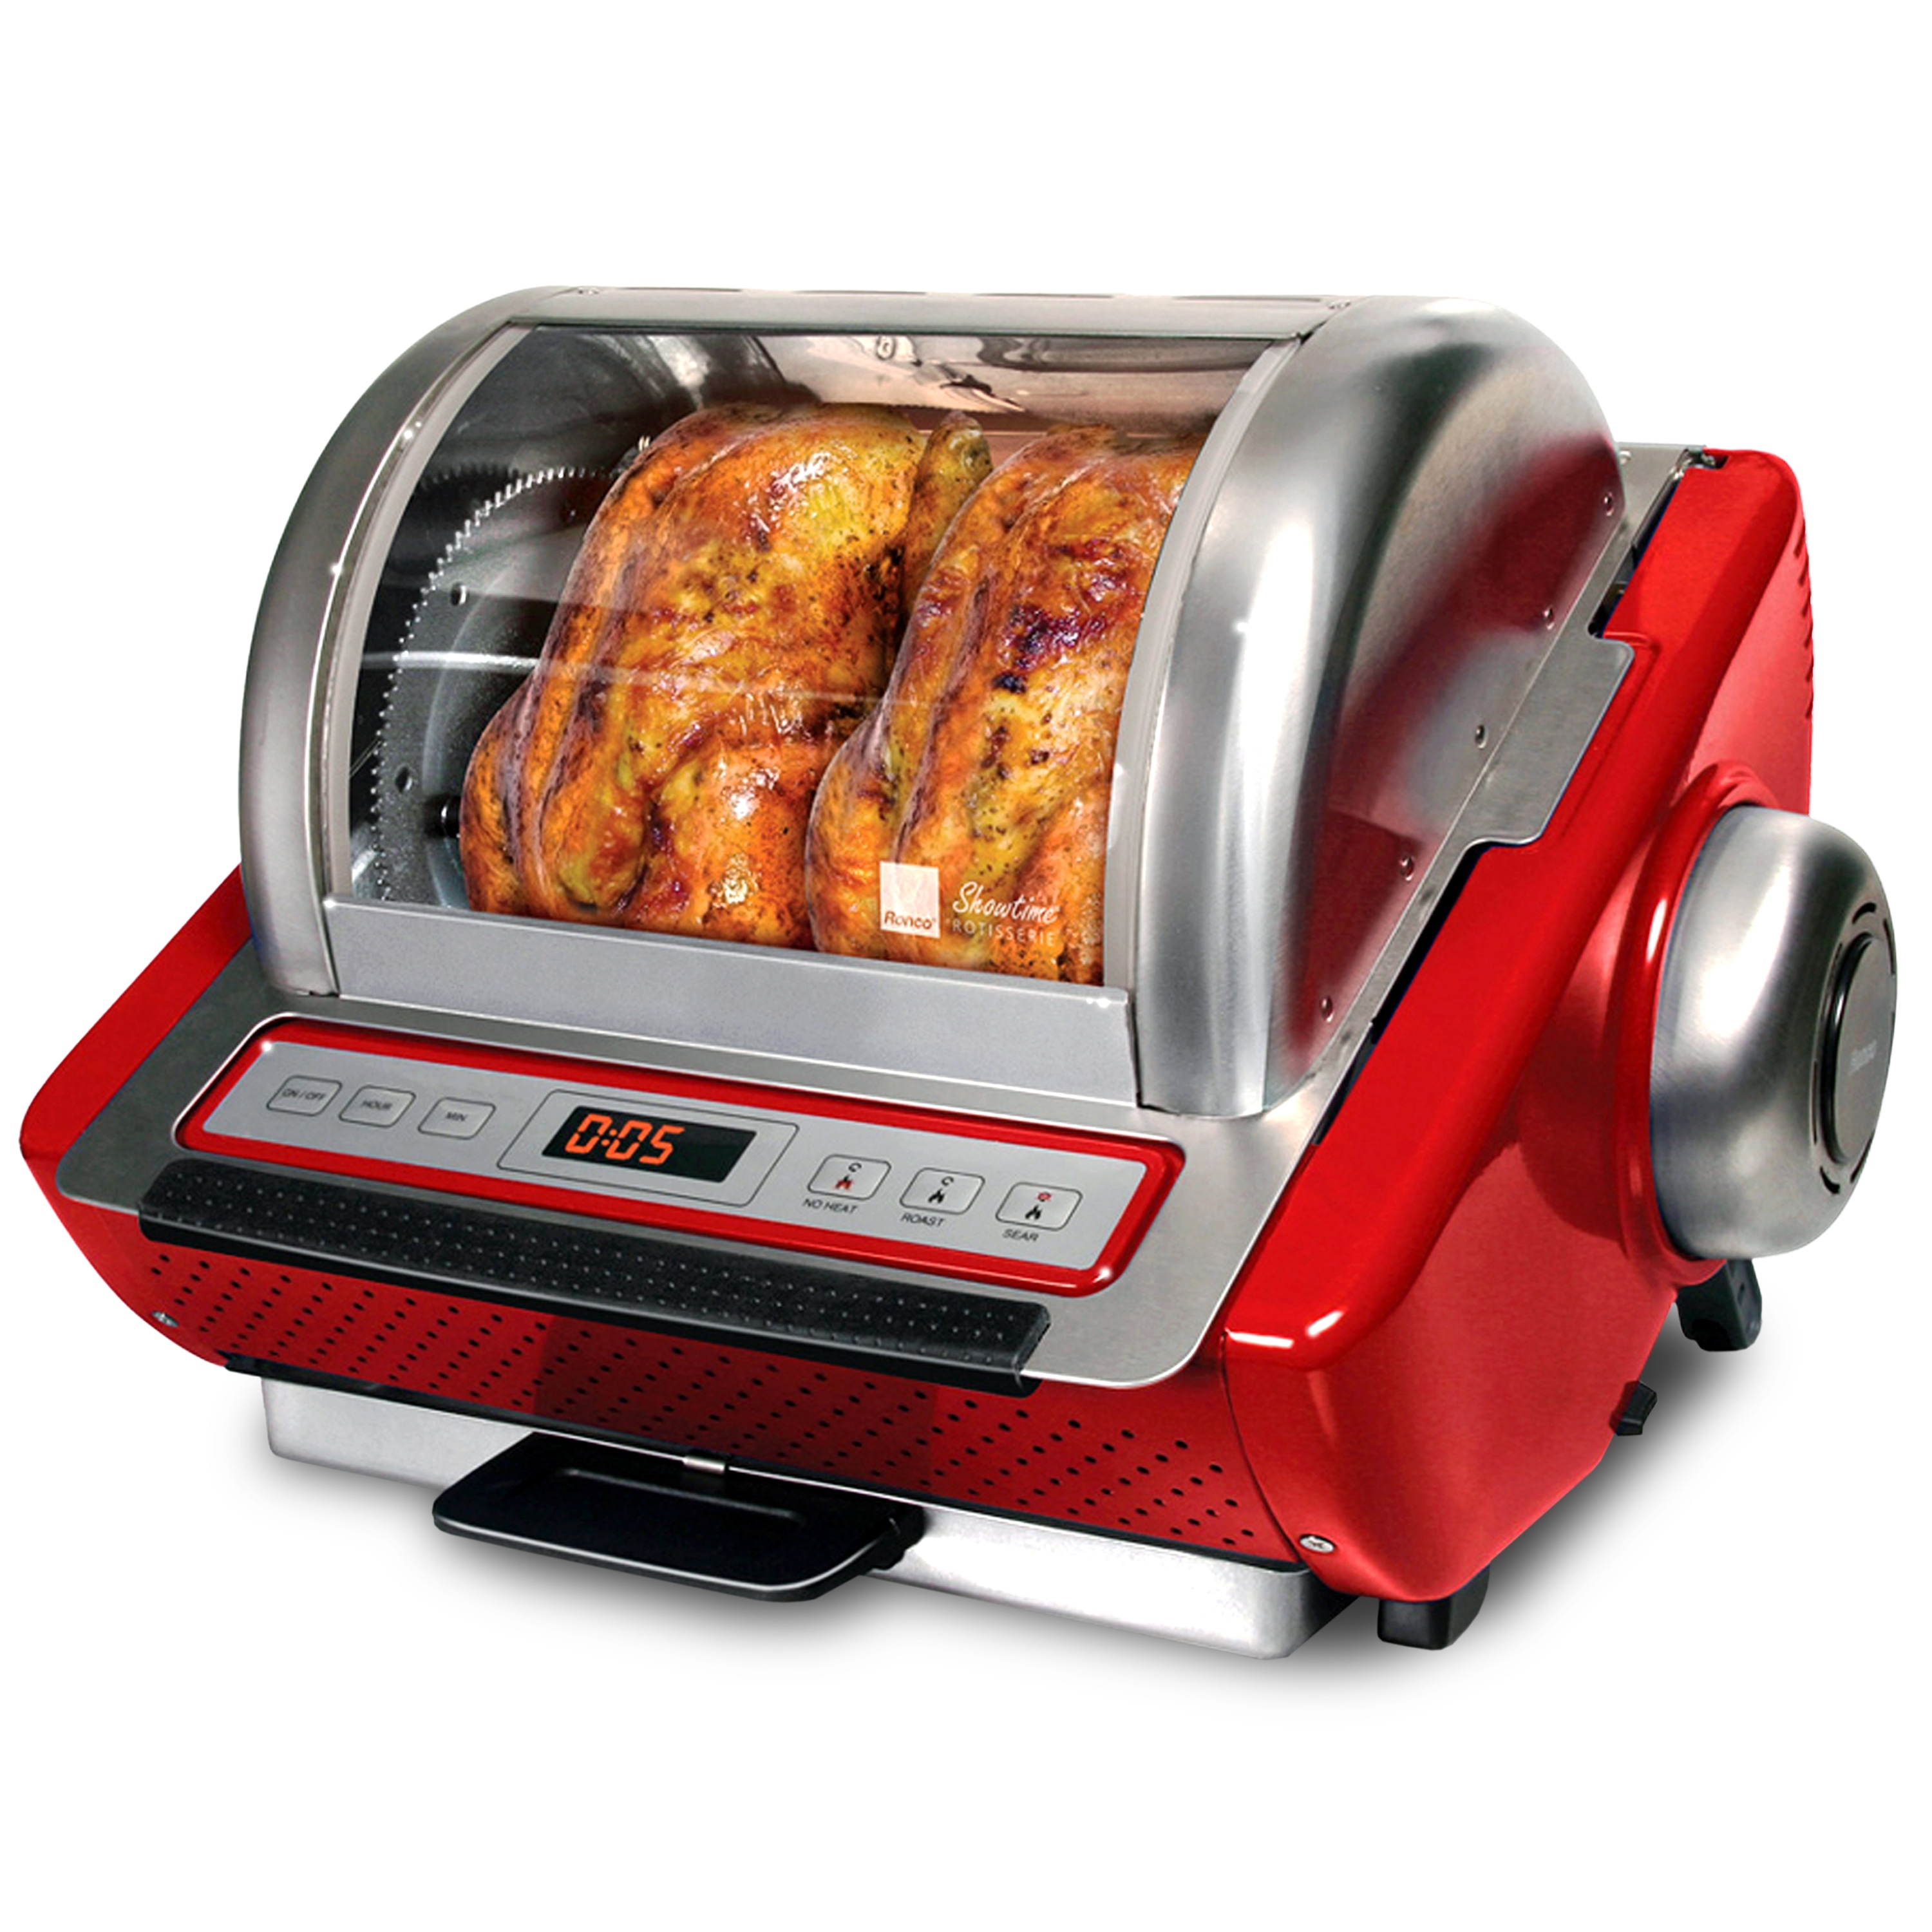 https://ak1.ostkcdn.com/images/products/is/images/direct/af8089ee803037431f704f7fd0f401f856aee705/Ronco-ST5250-EZ-Store-Rotisserie.jpg